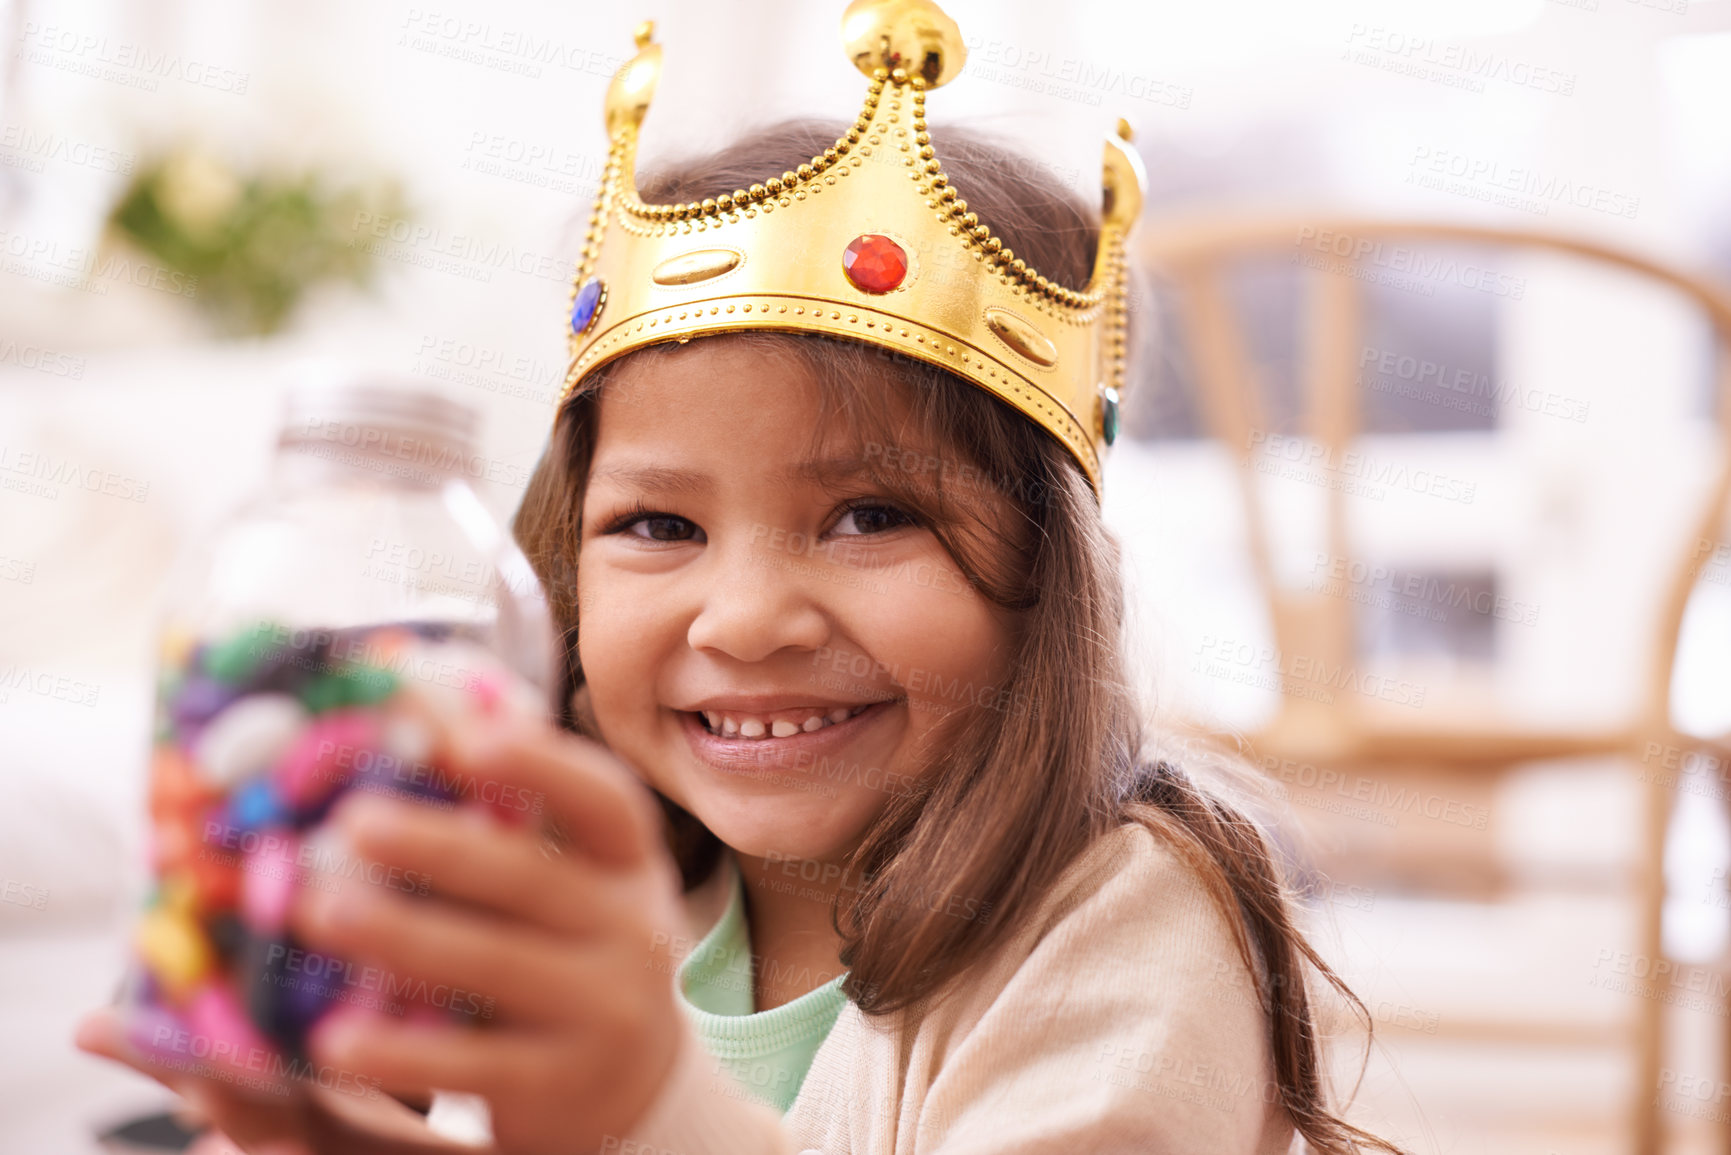 Buy stock photo A cute little girl dressed up as a princess while eating candy at home